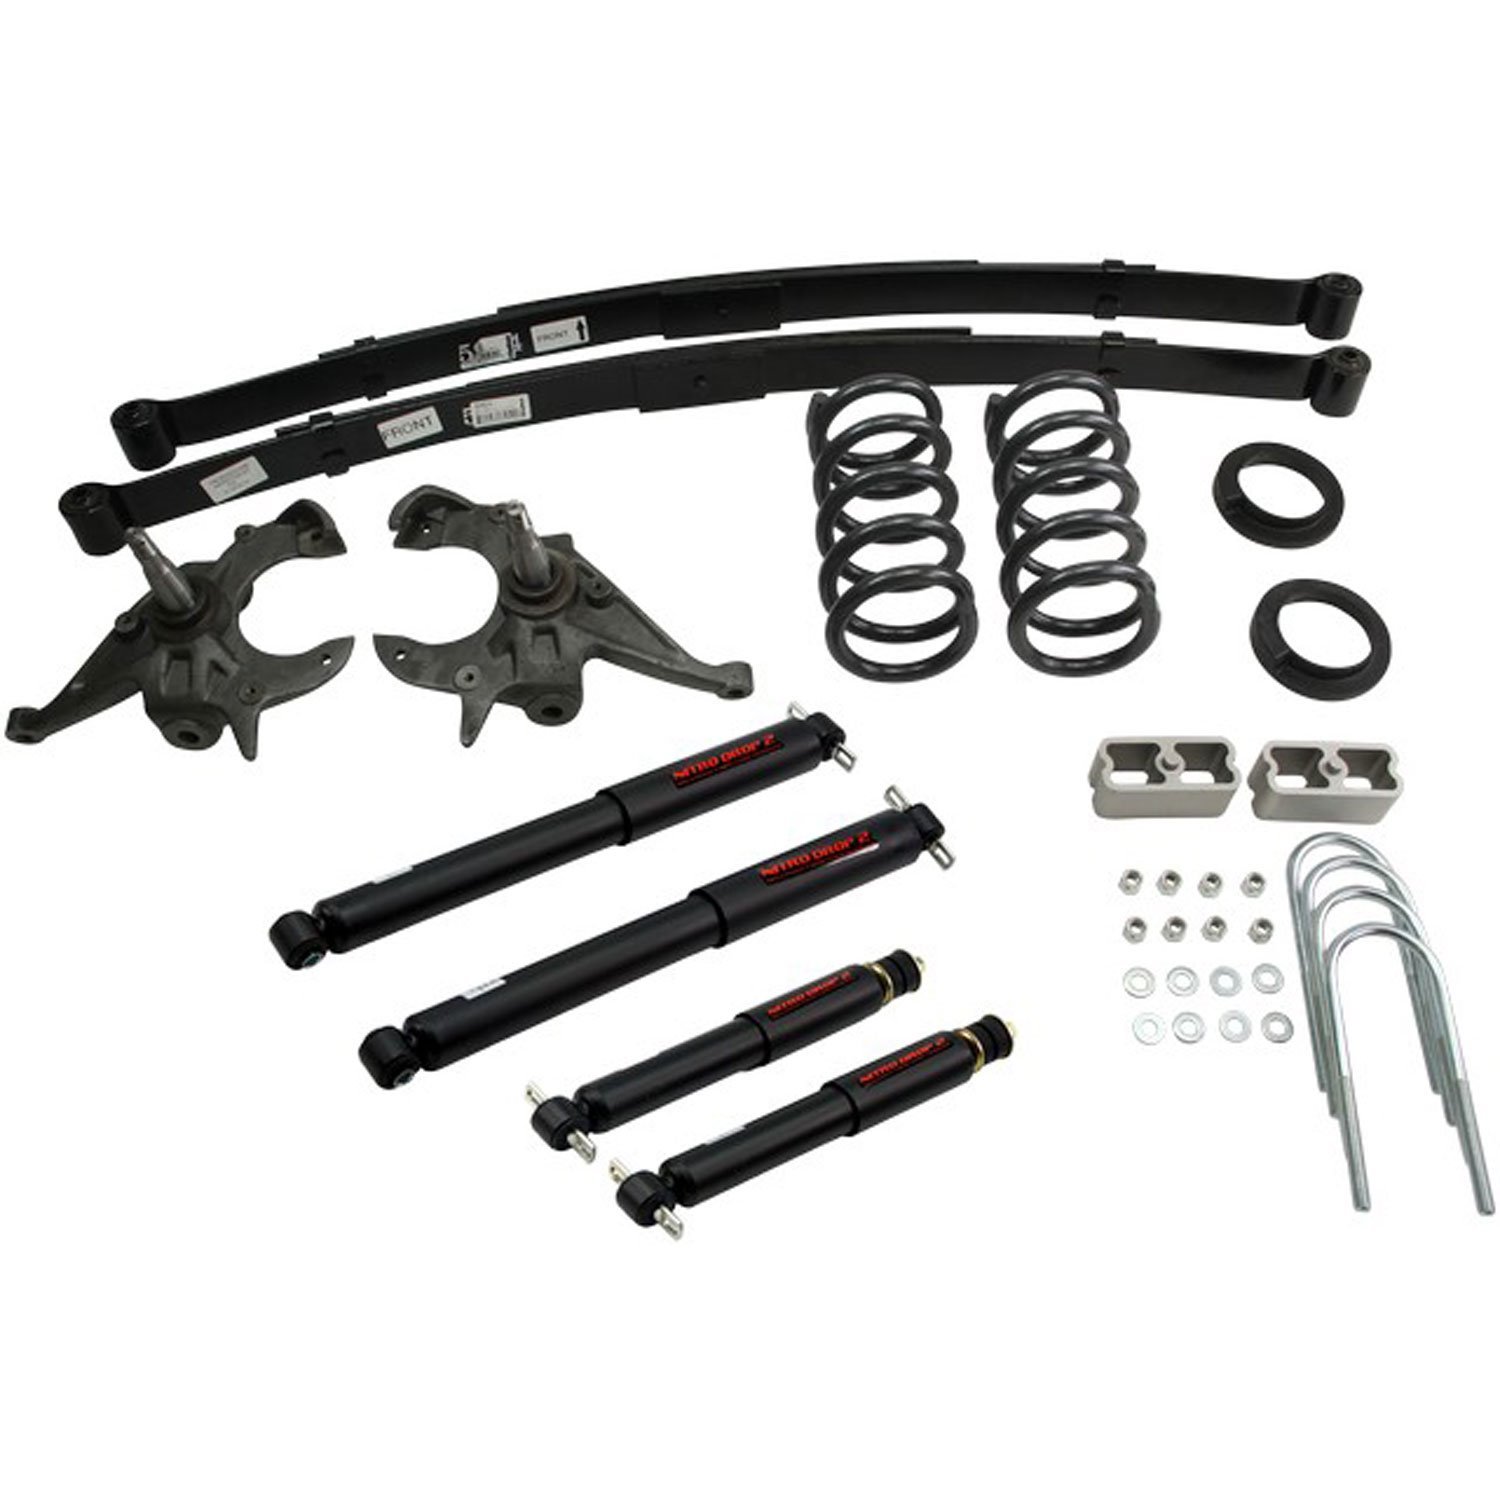 Complete Lowering Kit for 1994-2004 Chevy S10/GMC S15/Sonoma